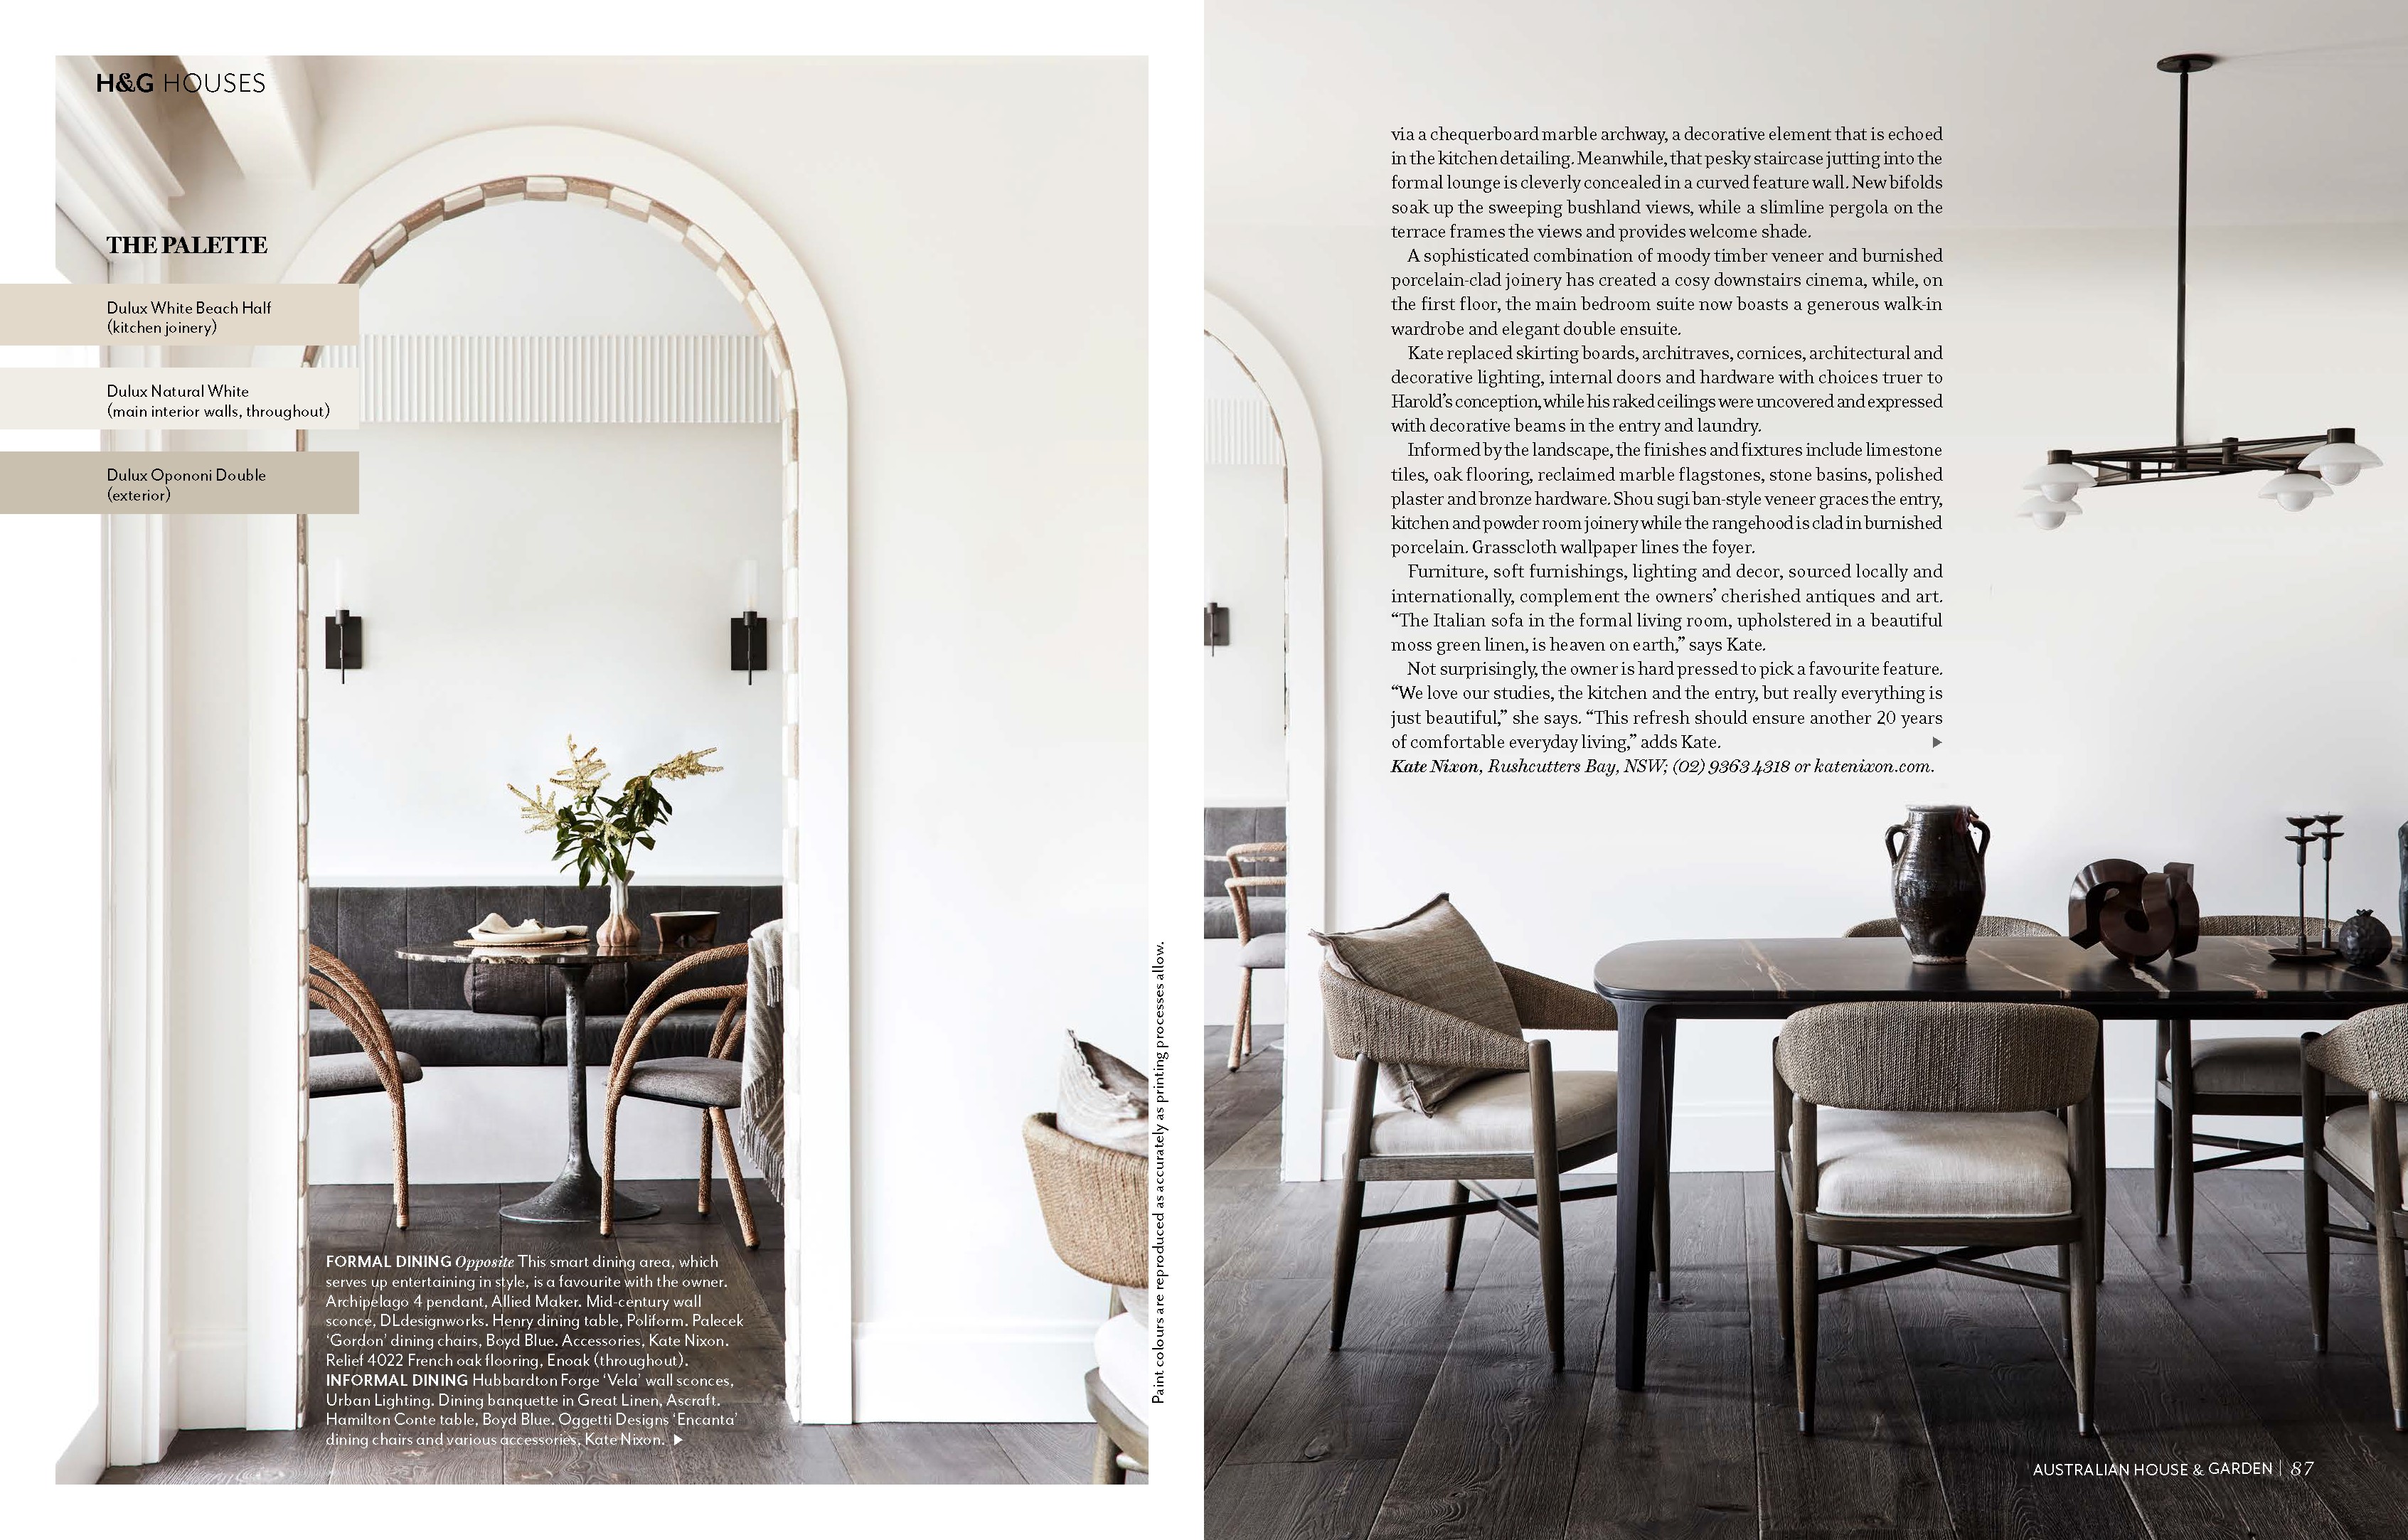 Kate Nixon's Sugarloaf project featured in House and Garden Magazine - Page 5-6